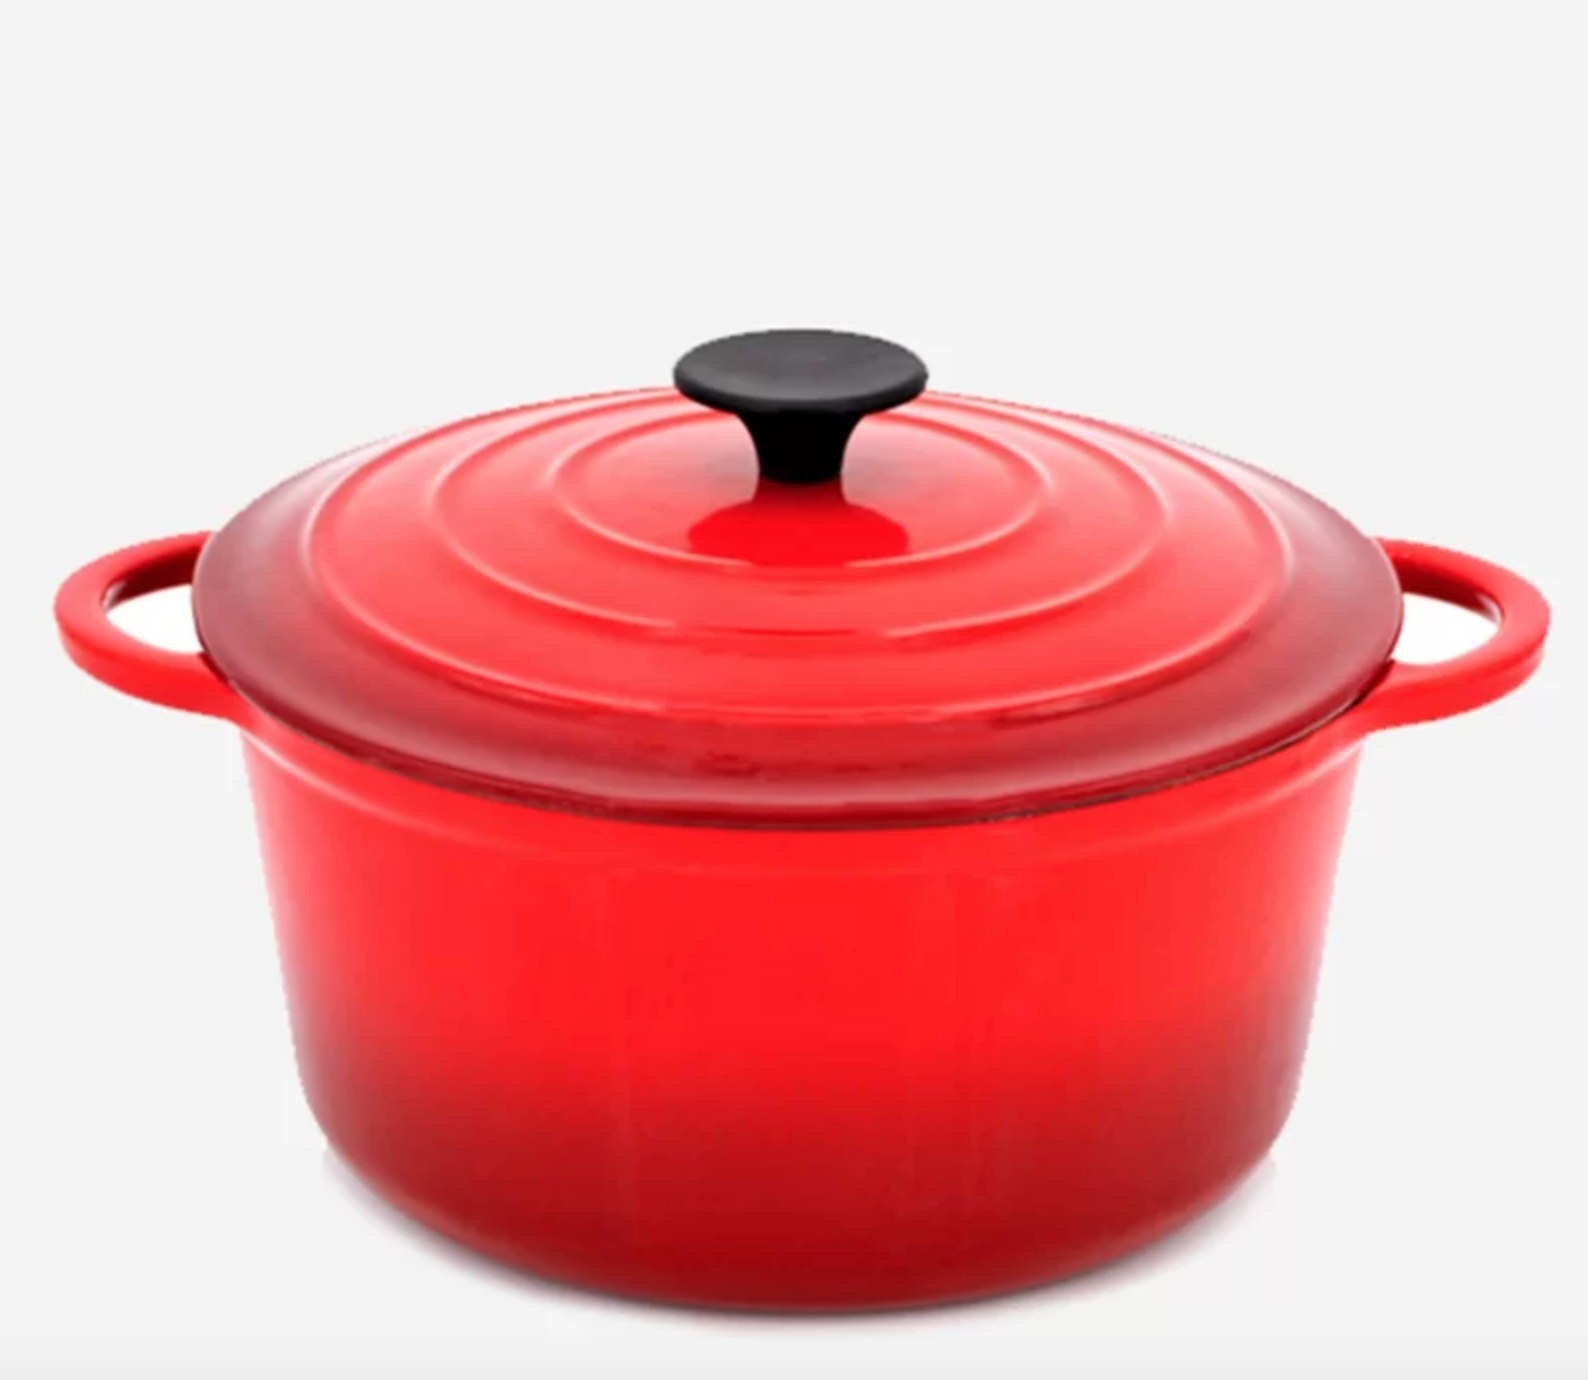 The cast iron dutch oven in red